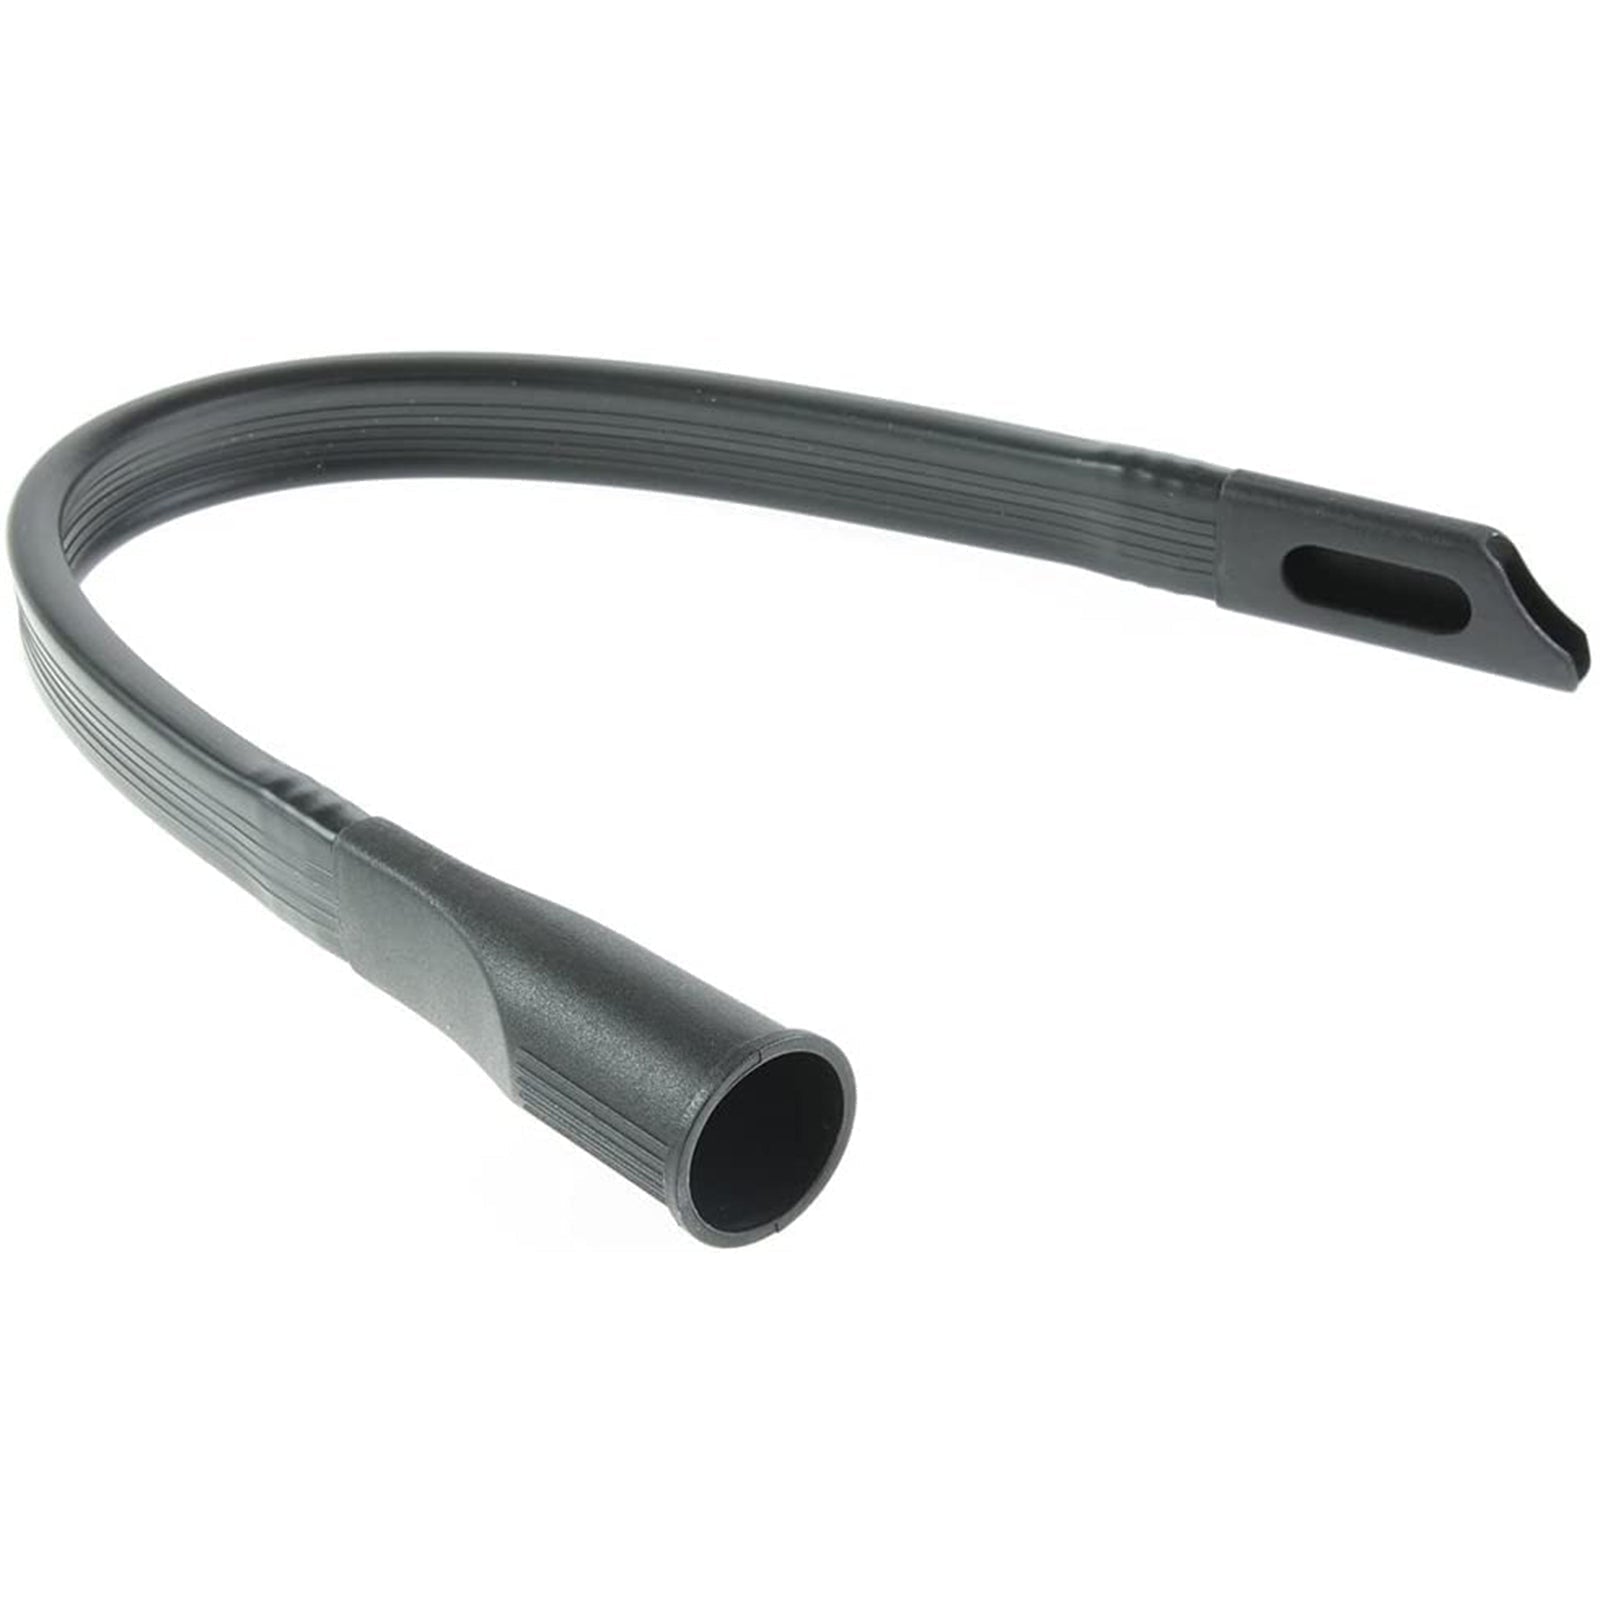 Flexible Crevice Tool Extra Long compatible with NATIONAL Vacuum Cleaner (32mm or 35mm)